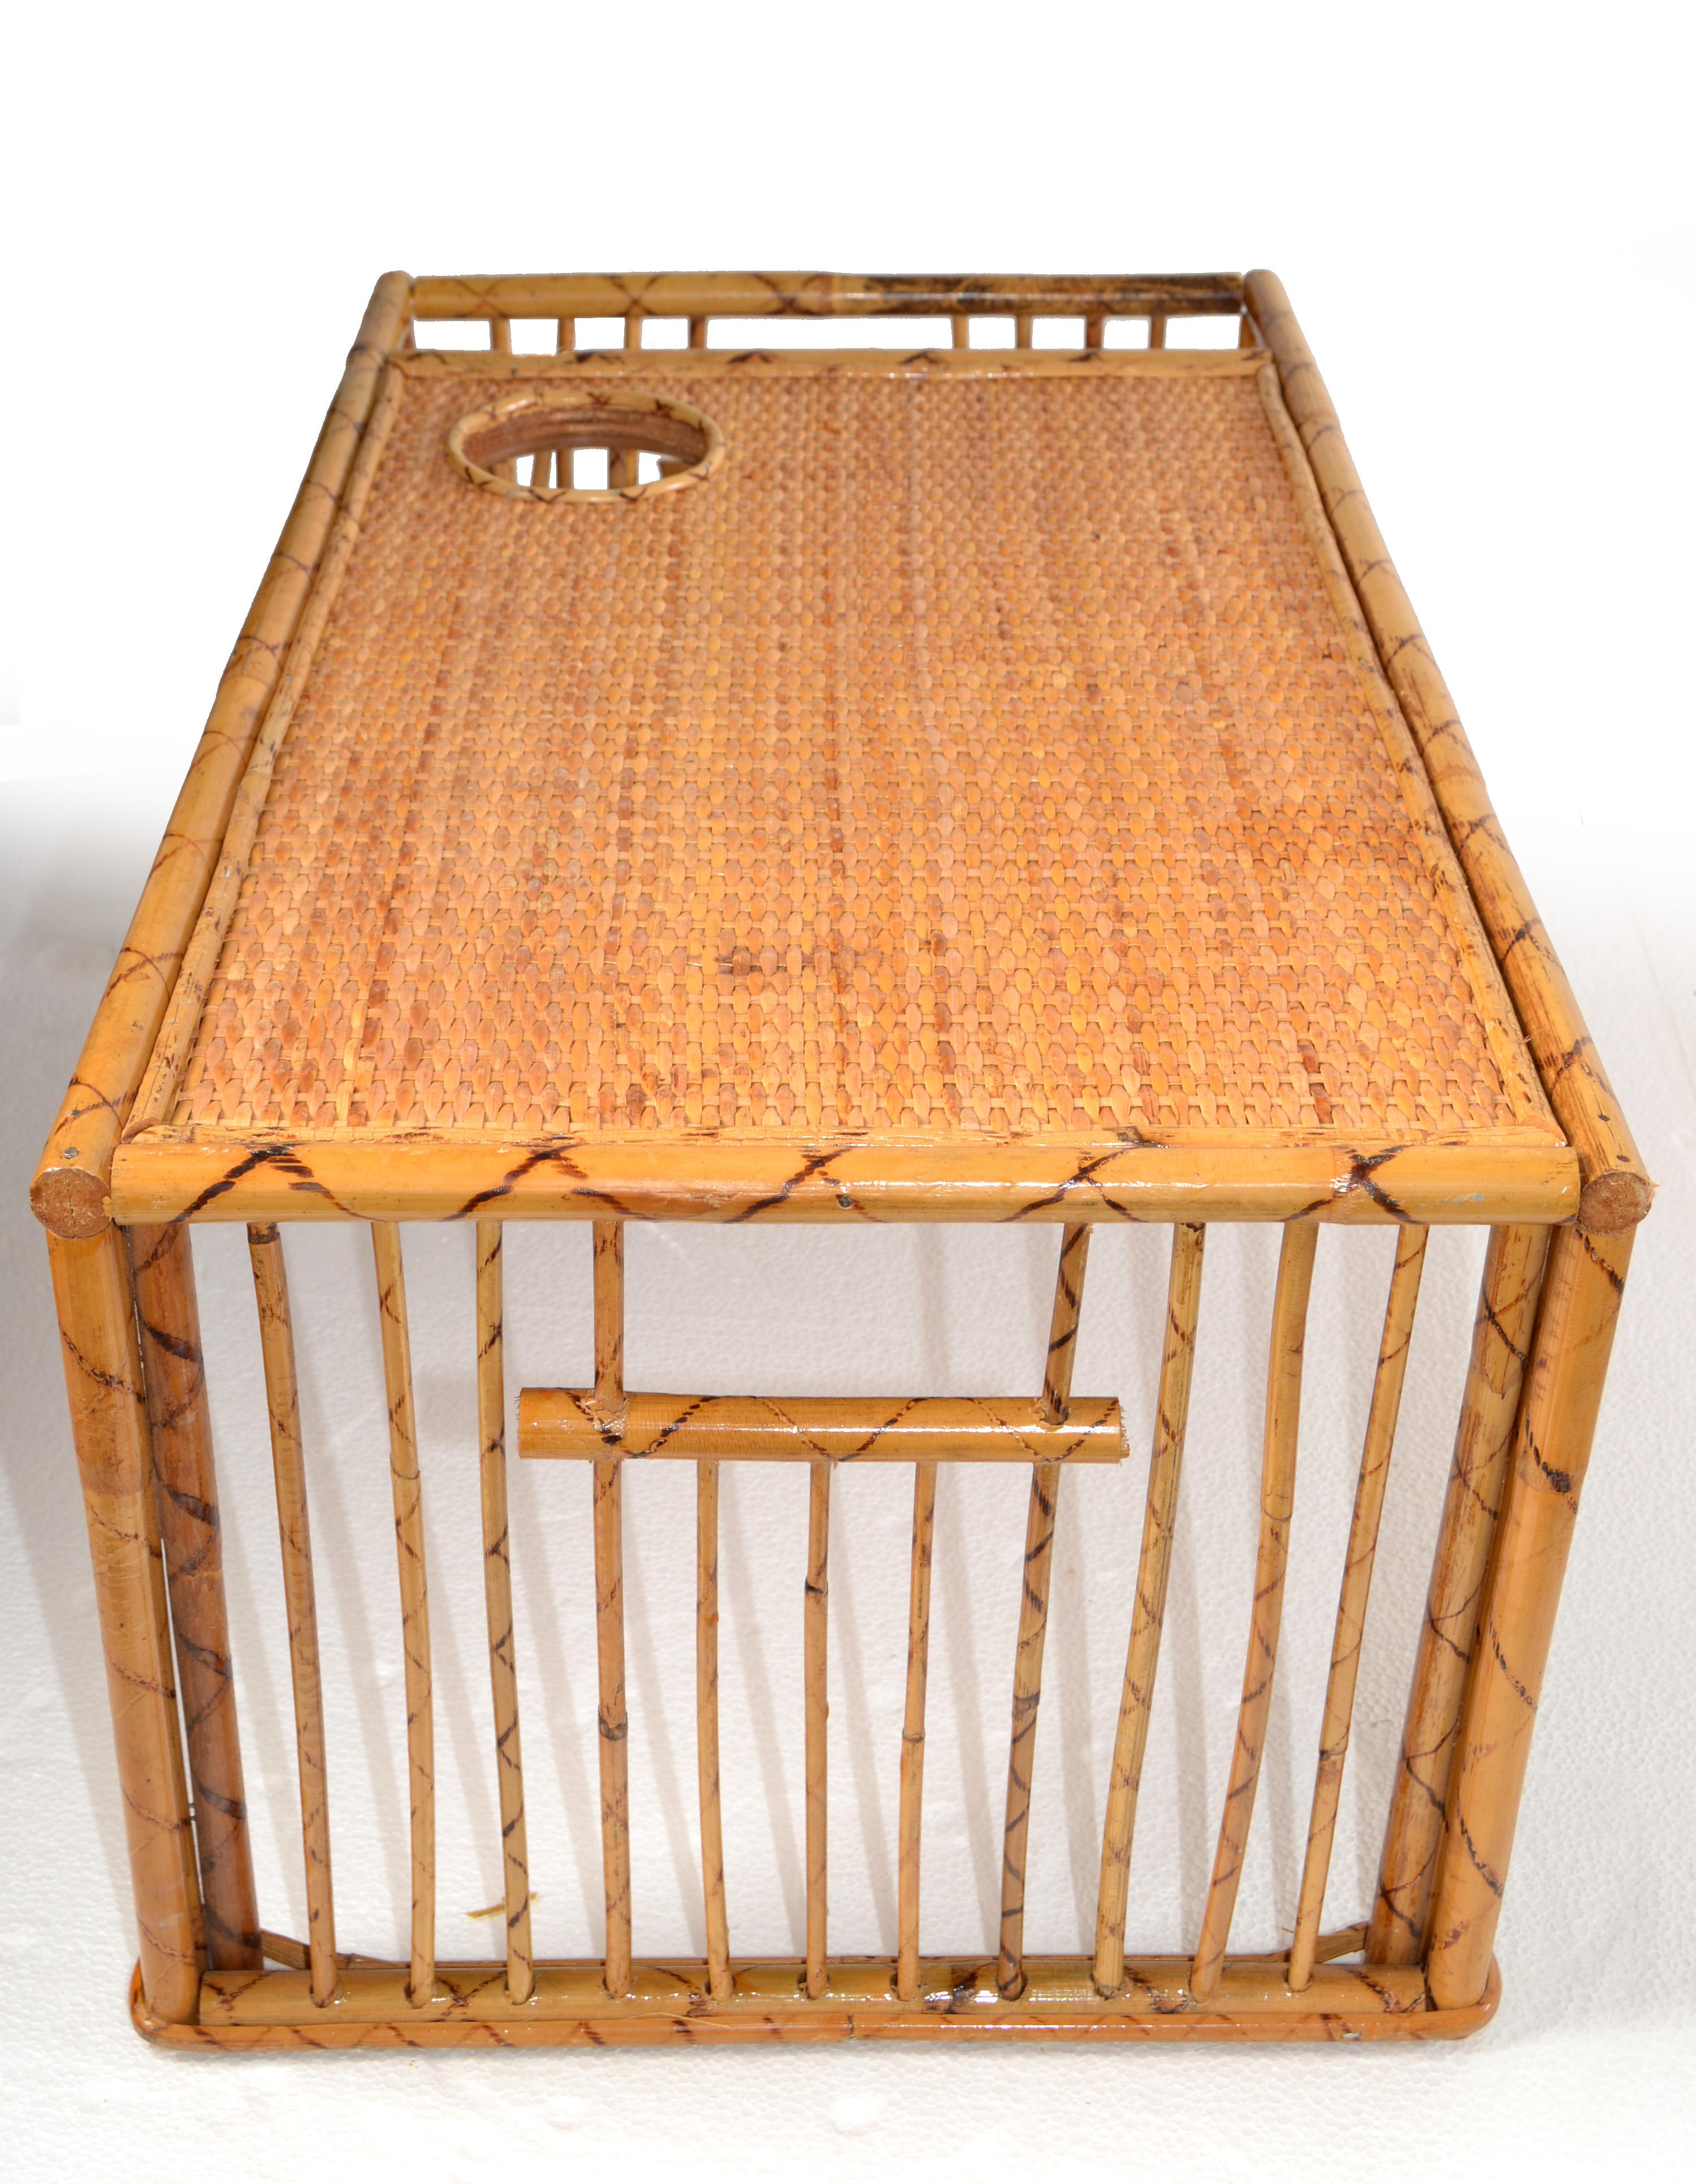 Hand-Crafted Bohemian Handwoven Reed Caning Bamboo Breakfast Bed Tray Table Cup Book Holder For Sale